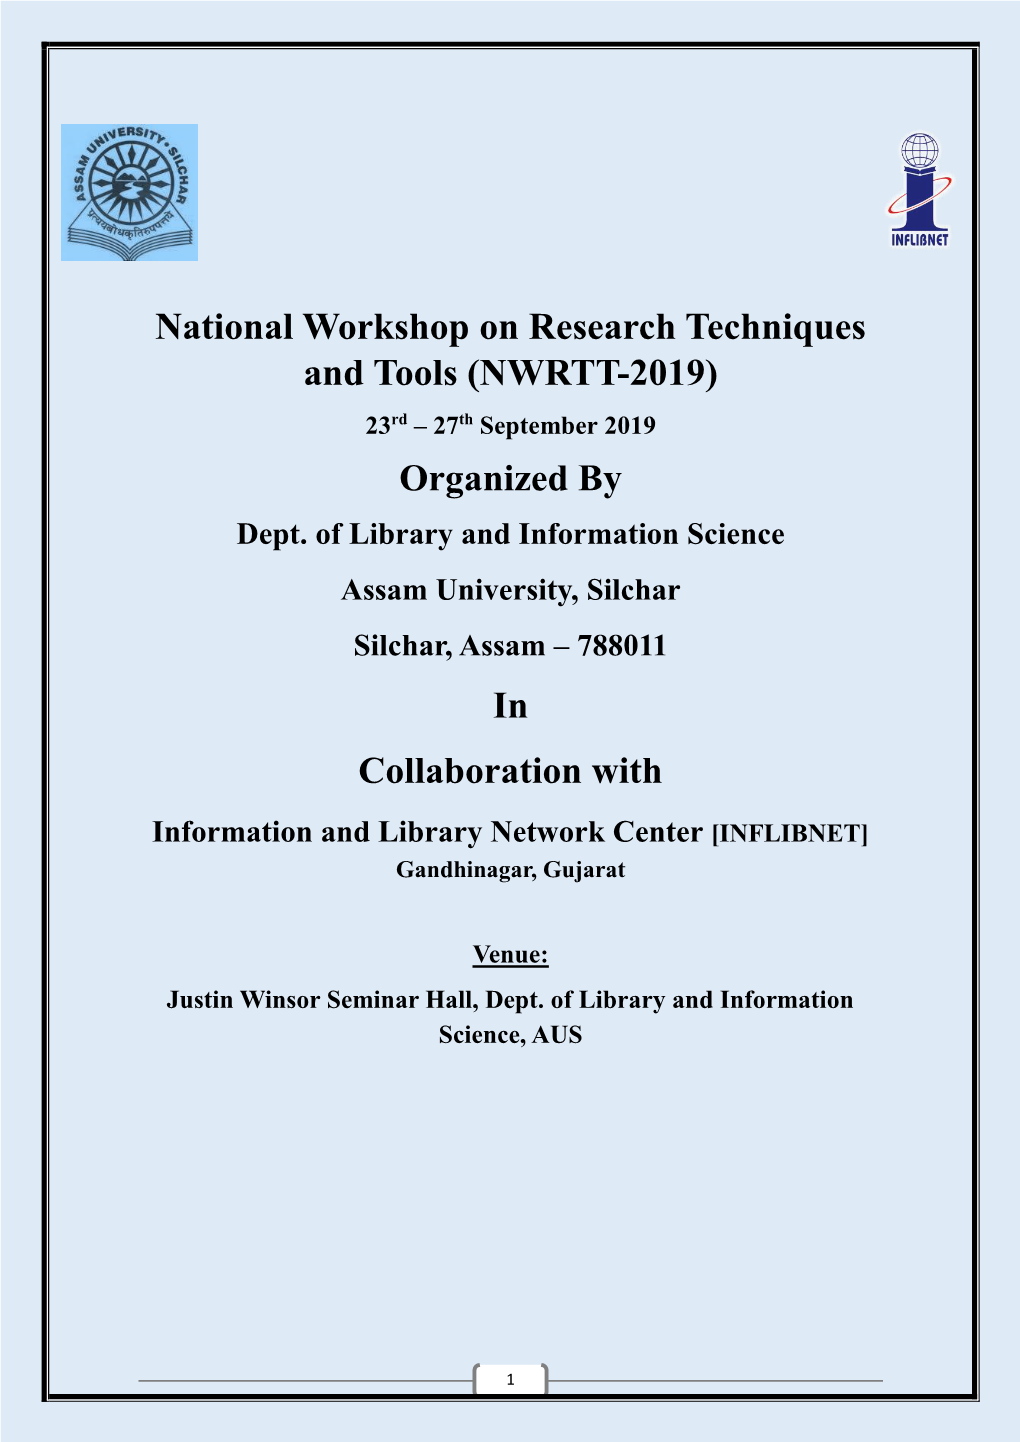 National Workshop on Research Techniques and Tools (NWRTT-2019) 23Rd – 27Th September 2019 Organized by Dept